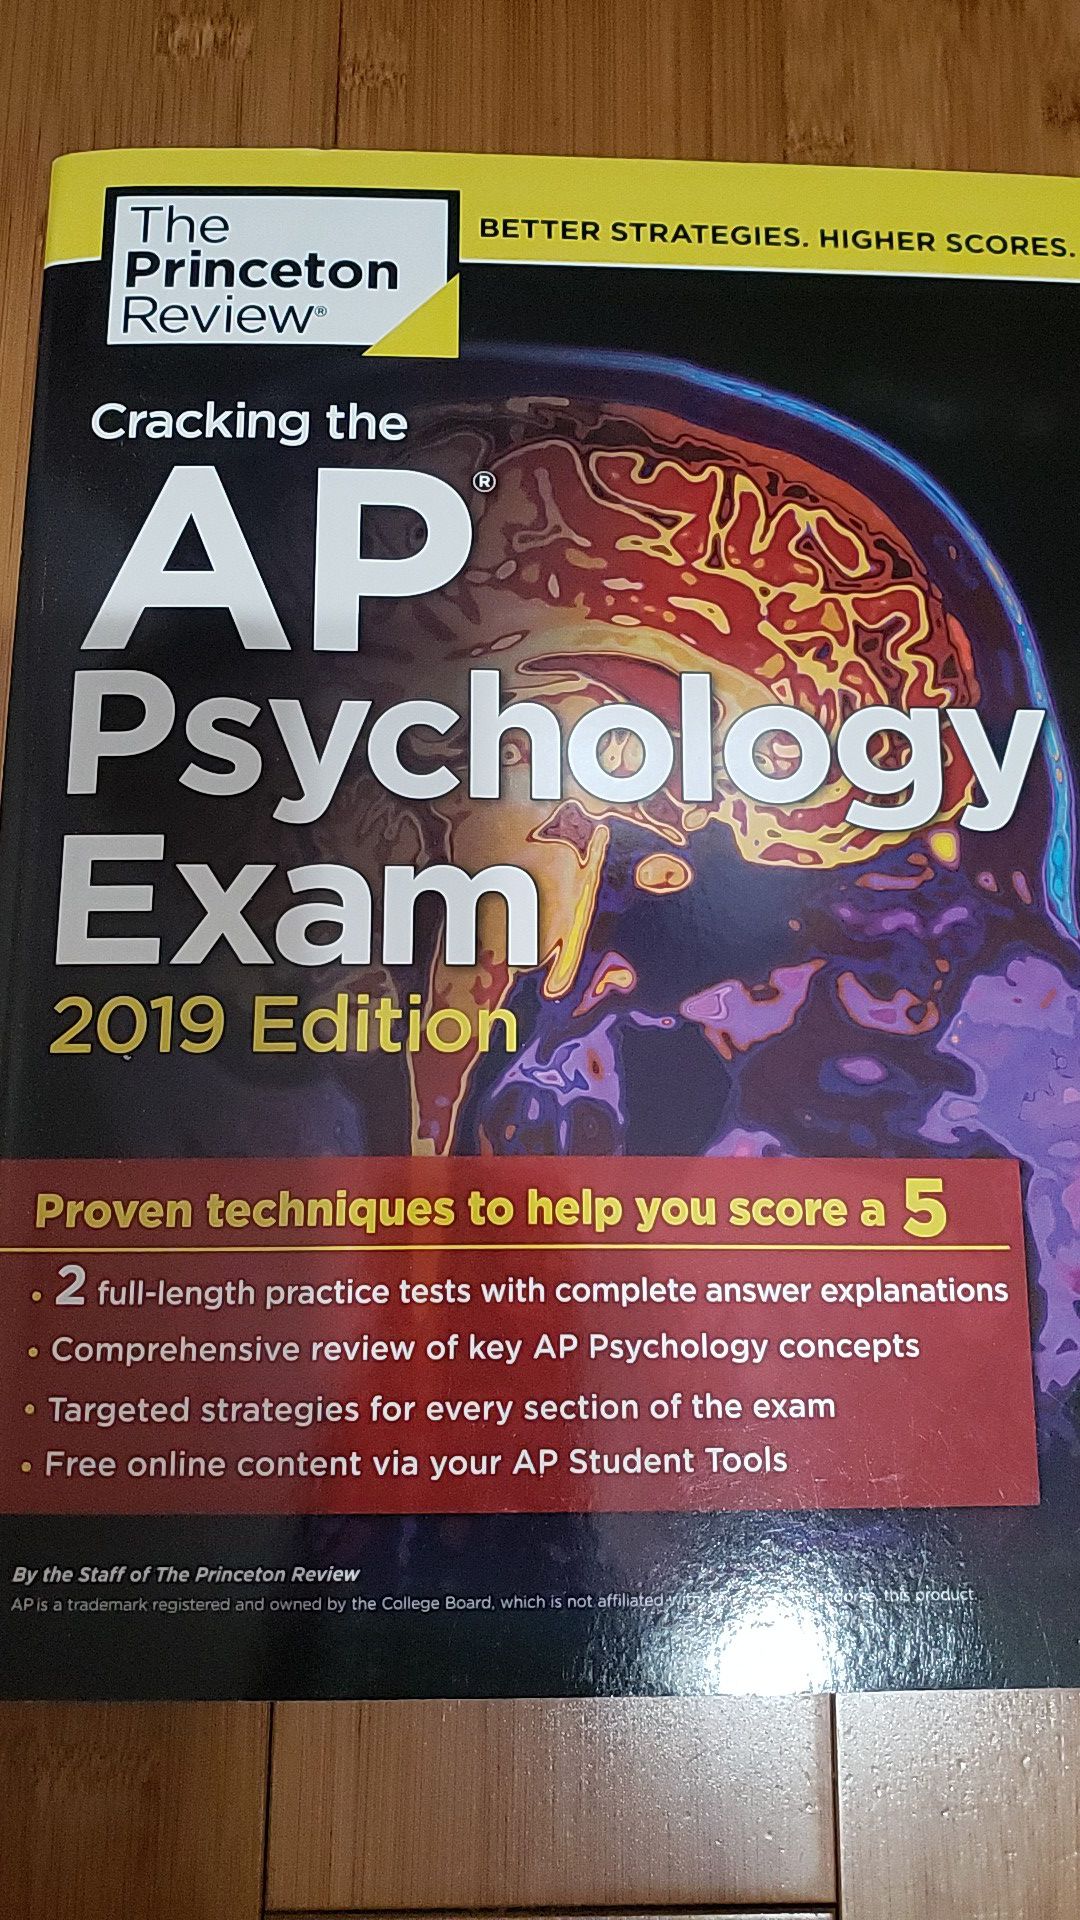 Cracking the AP Psychology Exam 2019 Edition by the Princeton Review